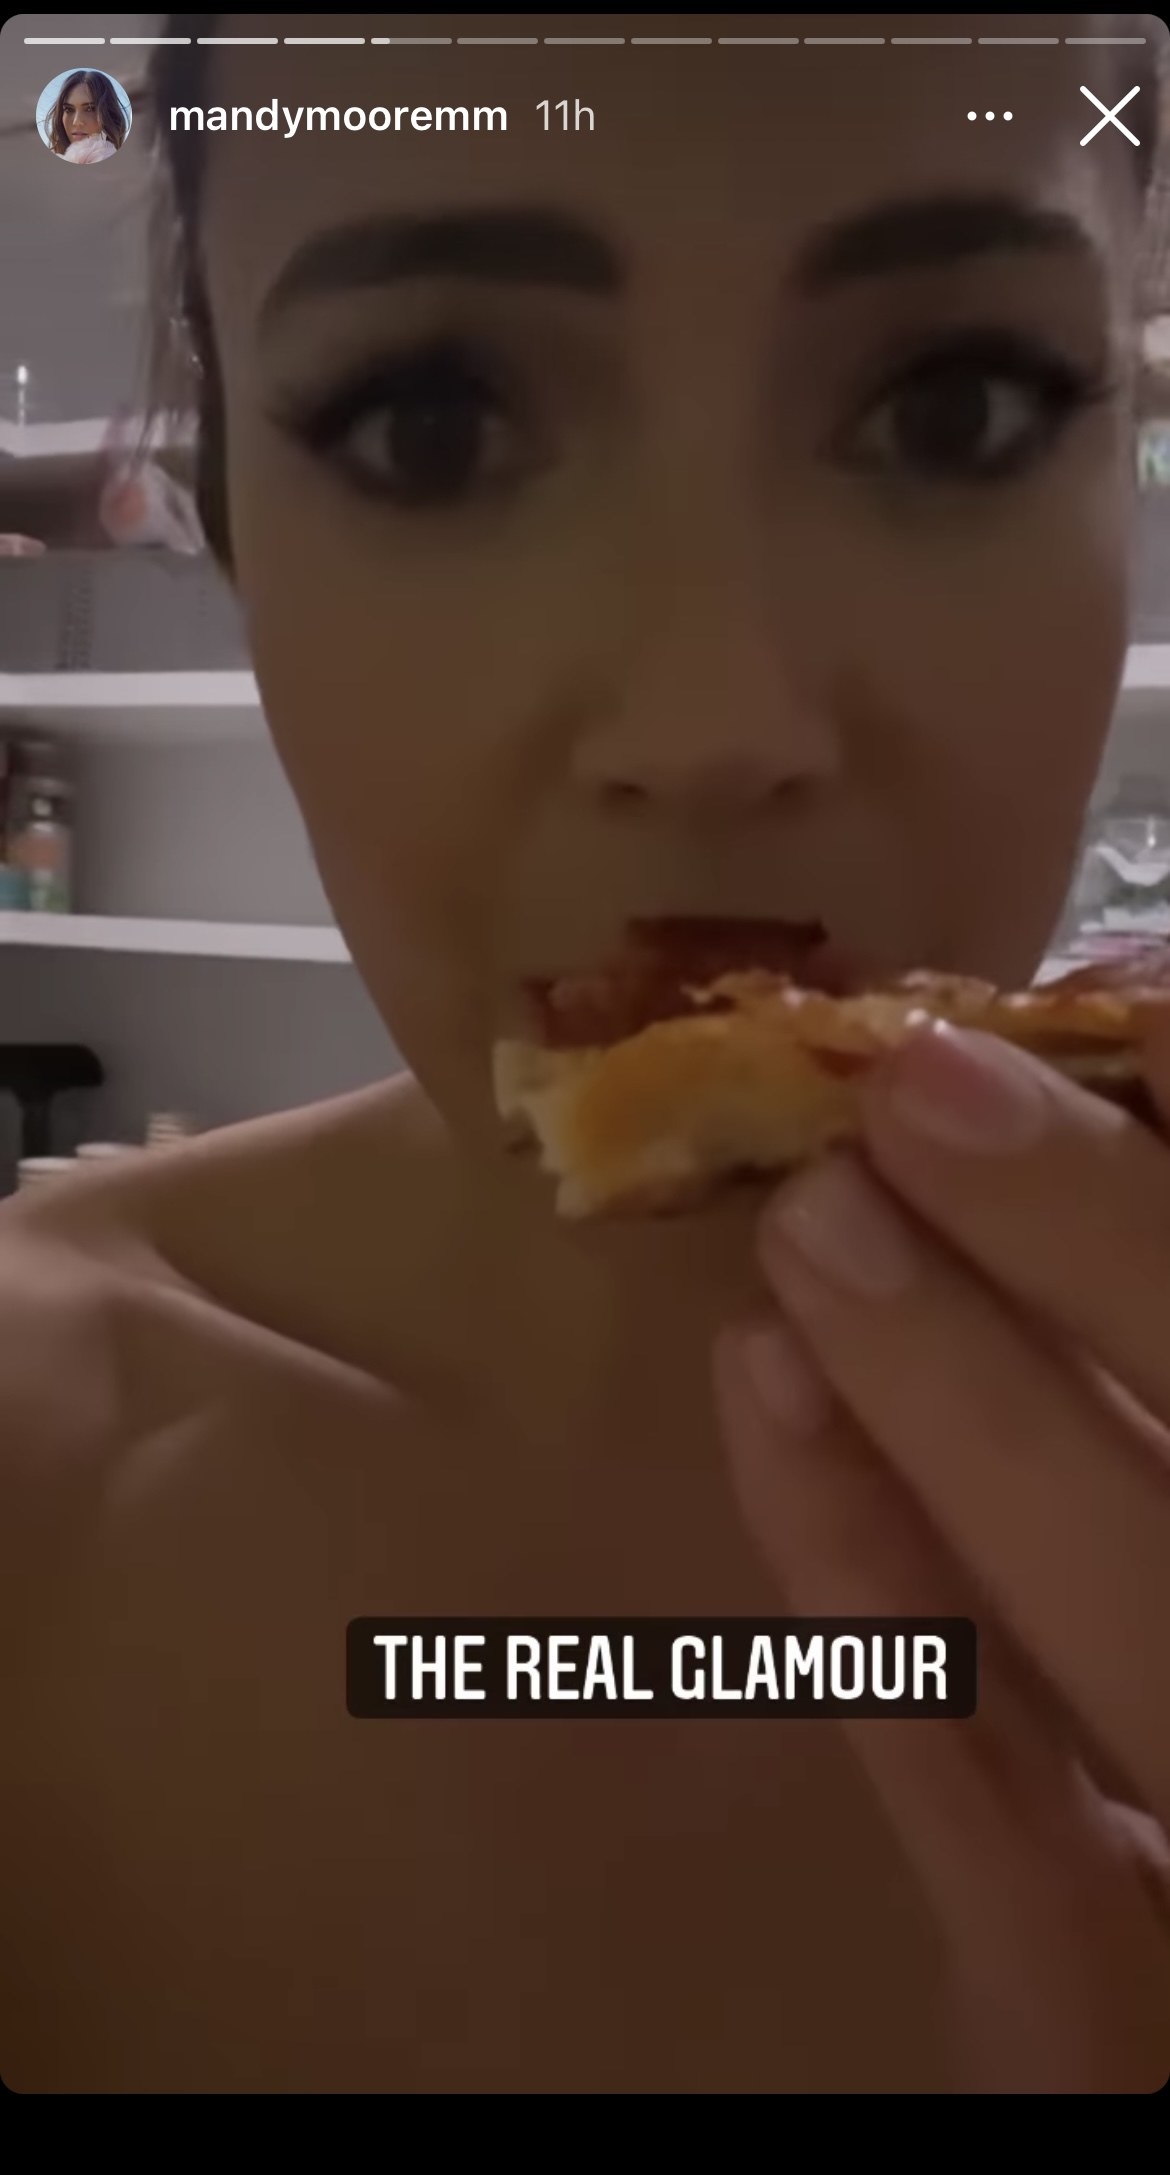 Mandy eating pizza with the caption &quot;The real glamour&quot;